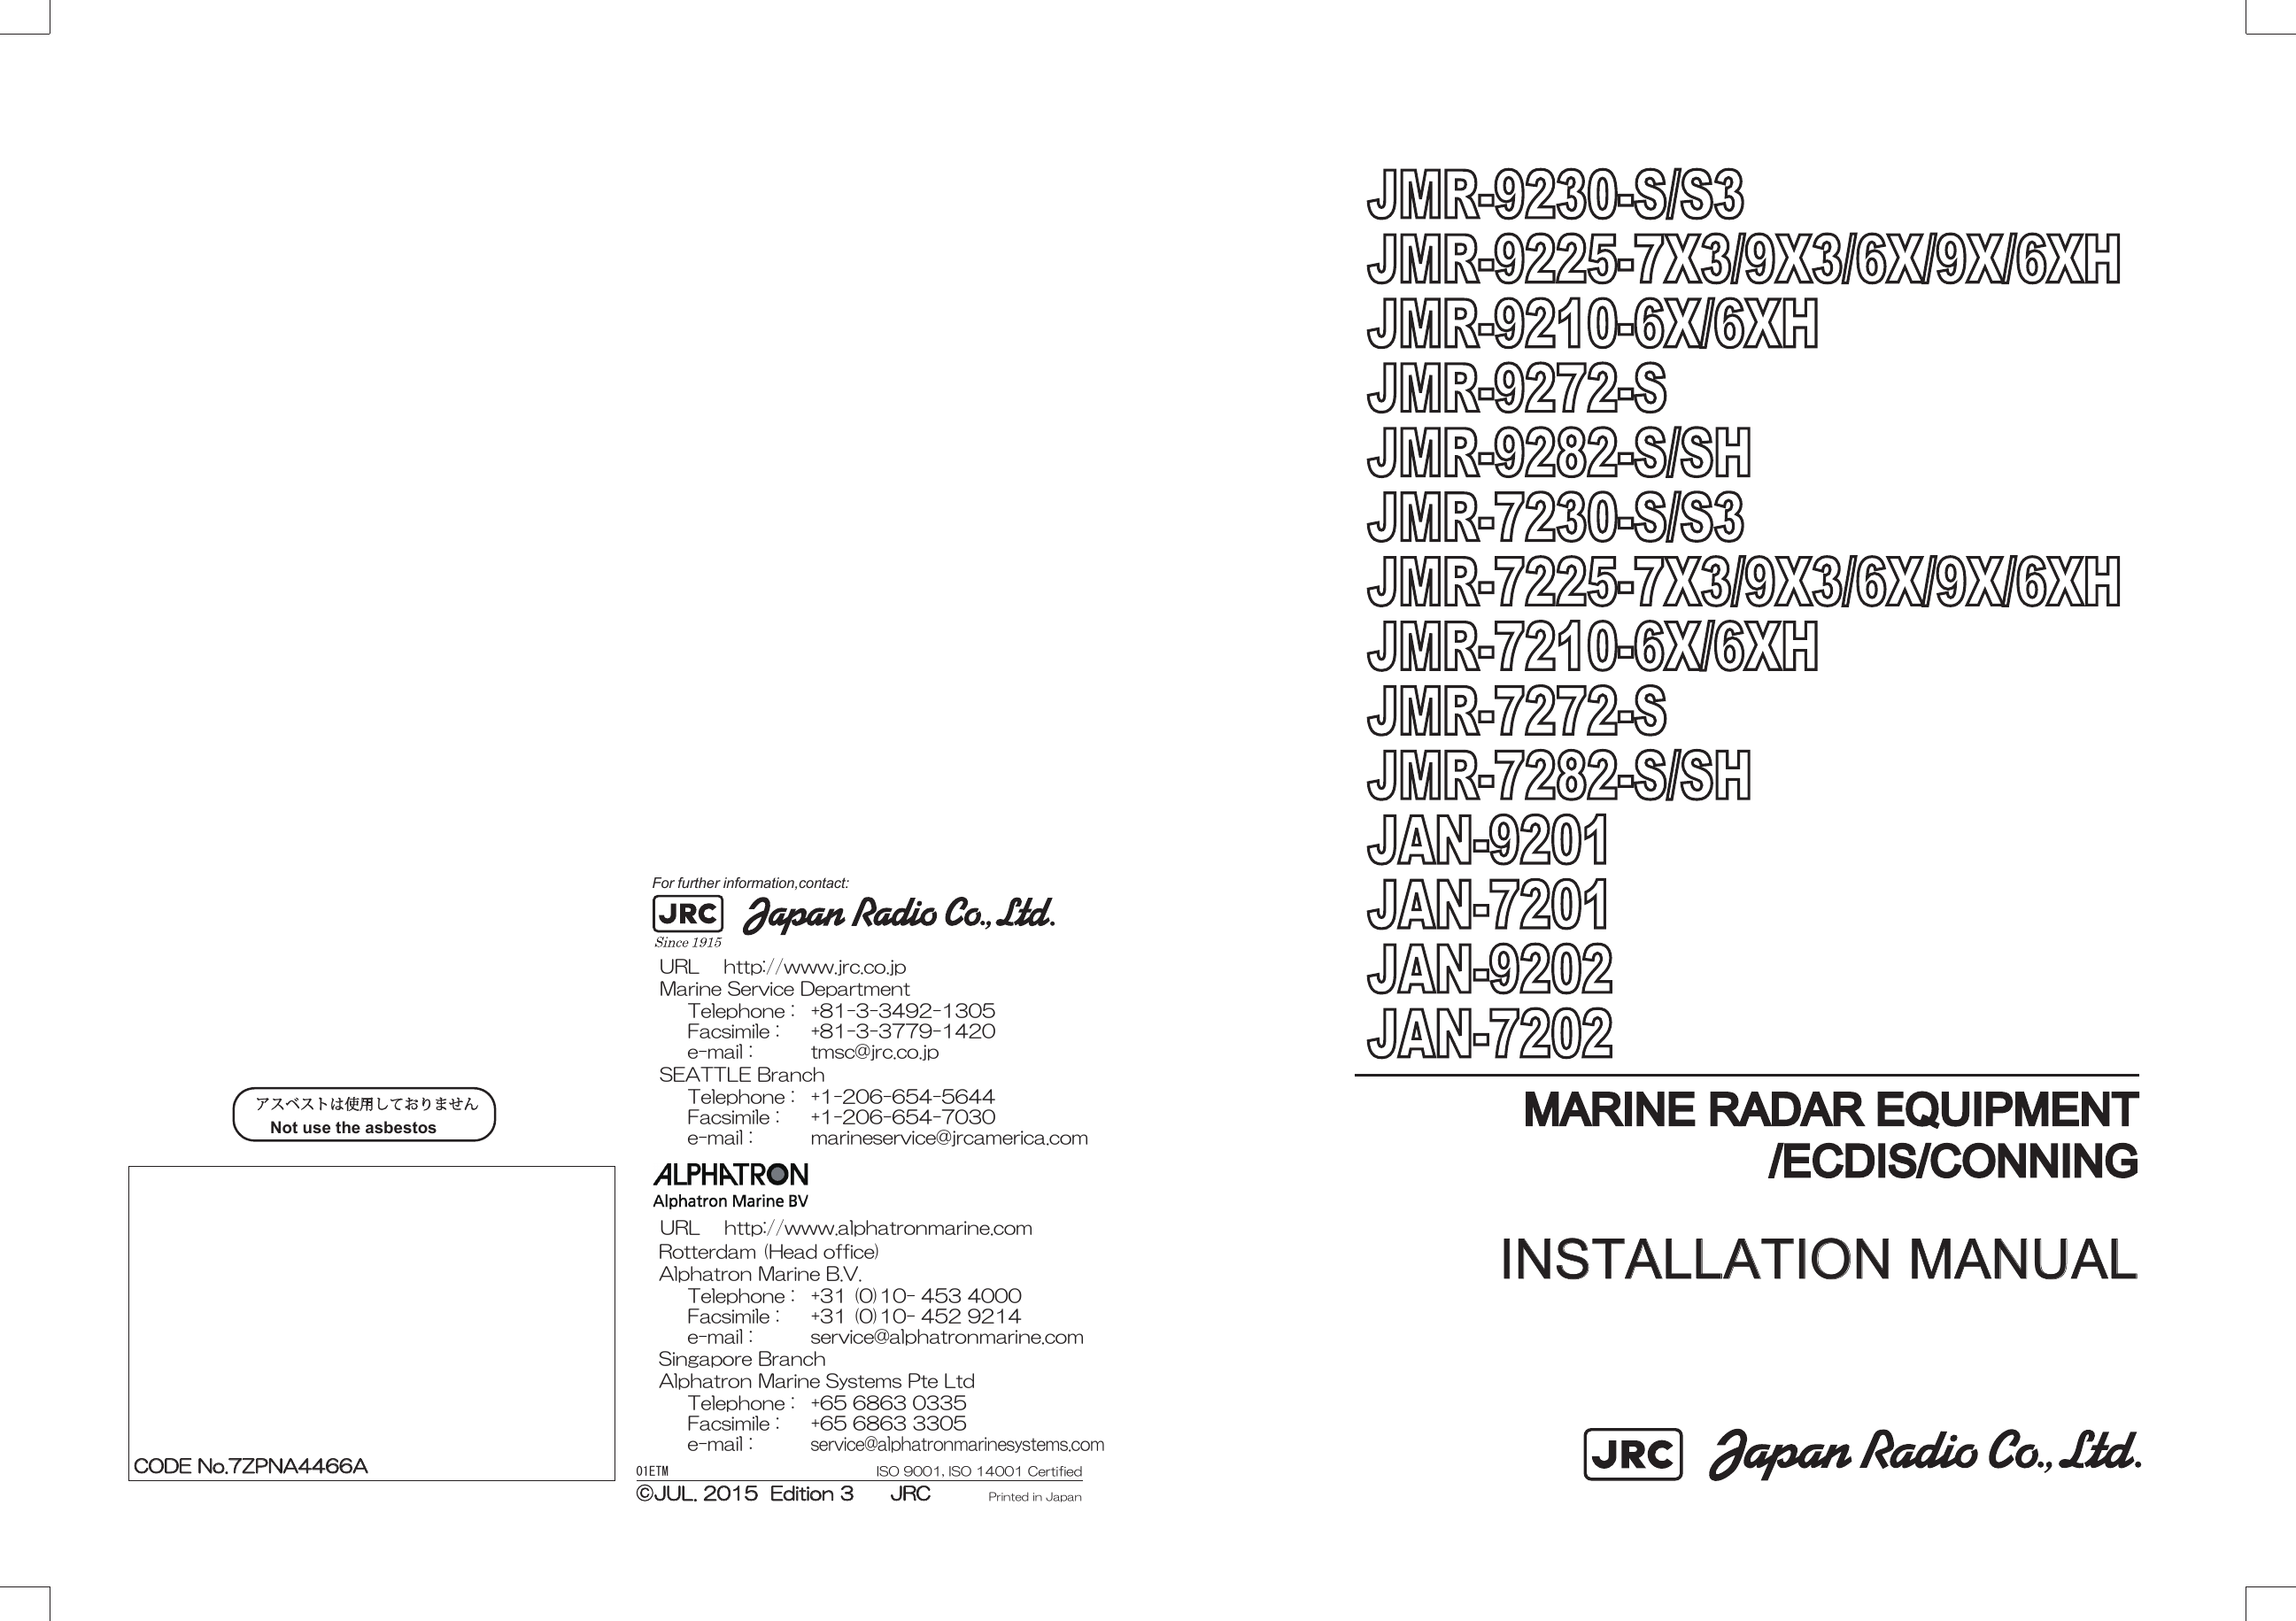 01ETM ISO 9001, ISO 14001 CertifiedPrinted in JapanMarine Service Department+81-3-3492-1305+81-3-3779-1420tmsc@jrc.co.jpTelephone :Facsimile :e-mail :Alphatron Marine Systems Pte LtdTelephone :Facsimile :e-mail :+65 6863 0335+65 6863 3305service@alphatronmarinesystems.comSingapore BranchSEATTLE BranchTelephone :Facsimile :e-mail :+1-206-654-5644+1-206-654-7030marineservice@jrcamerica.comCODE No.7ZPNA4466ACODE No.7ZPNA4466AJUL. 2015  Edition 3      JRCJUL. 2015  Edition 3      JRCNot use the asbestos For further information,contact:URL http://www.jrc.co.jpAlphatron Marine B.V.Telephone :Facsimile :e-mail :+31 (0)10- 453 4000+31 (0)10- 452 9214service@alphatronmarine.comRotterdam (Head office)URL http://www.alphatronmarine.comMARINE RADAR EQUIPMENTMARINE RADAR EQUIPMENT/ECDIS/CONNING/ECDIS/CONNINGINSTALLATION MANUALINSTALLATION MANUALJMR-9230-S/S3JMR-9230-S/S3JMR-9225-7X3/9X3/6X/9X/6XHJMR-9225-7X3/9X3/6X/9X/6XHJMR-9210-6X/6XHJMR-9210-6X/6XHJMR-9272-SJMR-9272-SJMR-9282-S/SHJMR-9282-S/SHJMR-7230-S/S3JMR-7230-S/S3JMR-7225-7X3/9X3/6X/9X/6XHJMR-7225-7X3/9X3/6X/9X/6XHJMR-7210-6X/6XHJMR-7210-6X/6XHJMR-7272-SJMR-7272-SJMR-7282-S/SHJMR-7282-S/SHJAN-9201JAN-9201JAN-7201JAN-7201JAN-9202JAN-9202JAN-7202JAN-7202